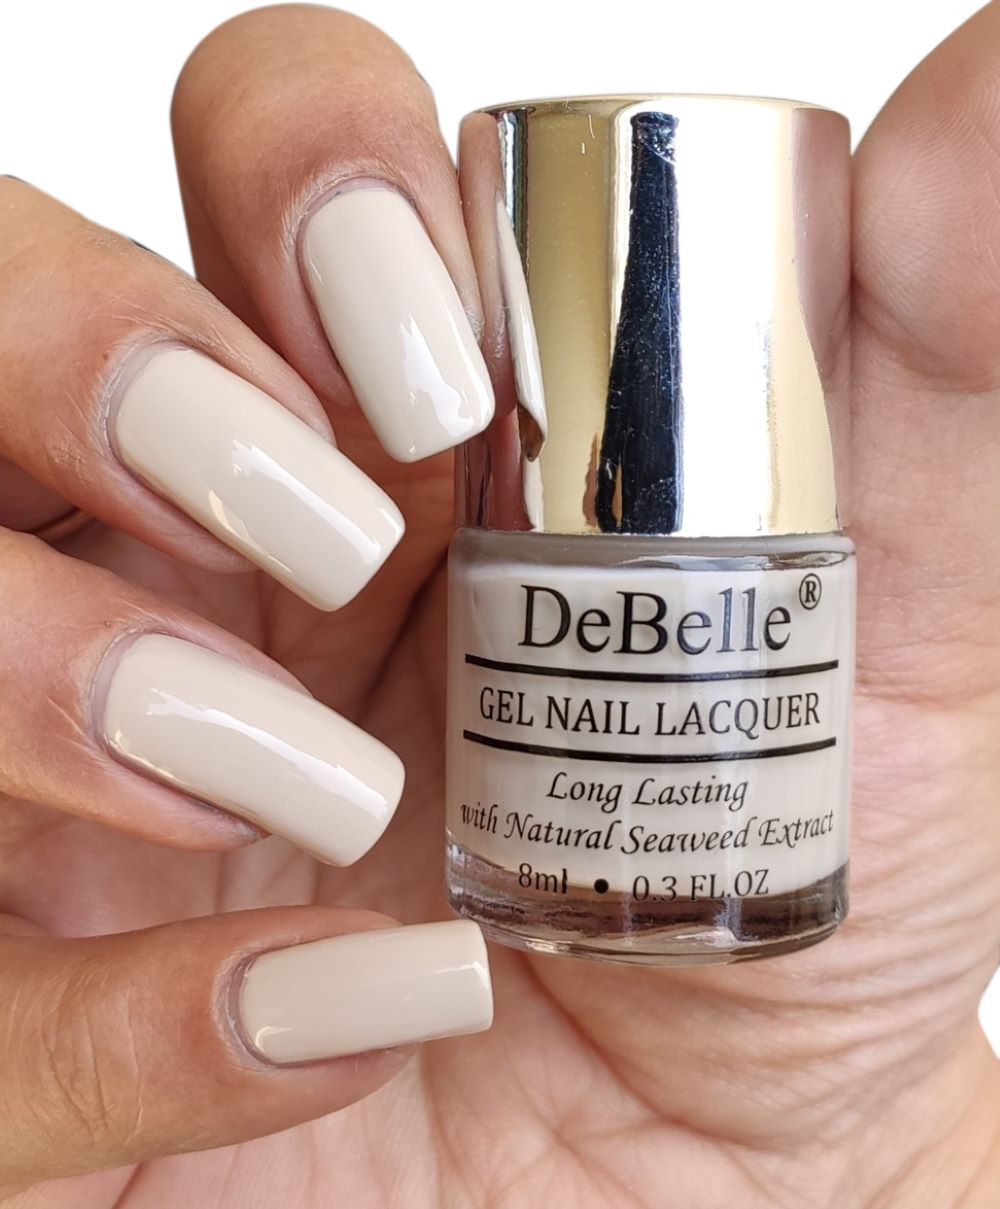 Gel Polish vs Gel Overlay - Which is the Best Choice for Your Nails?